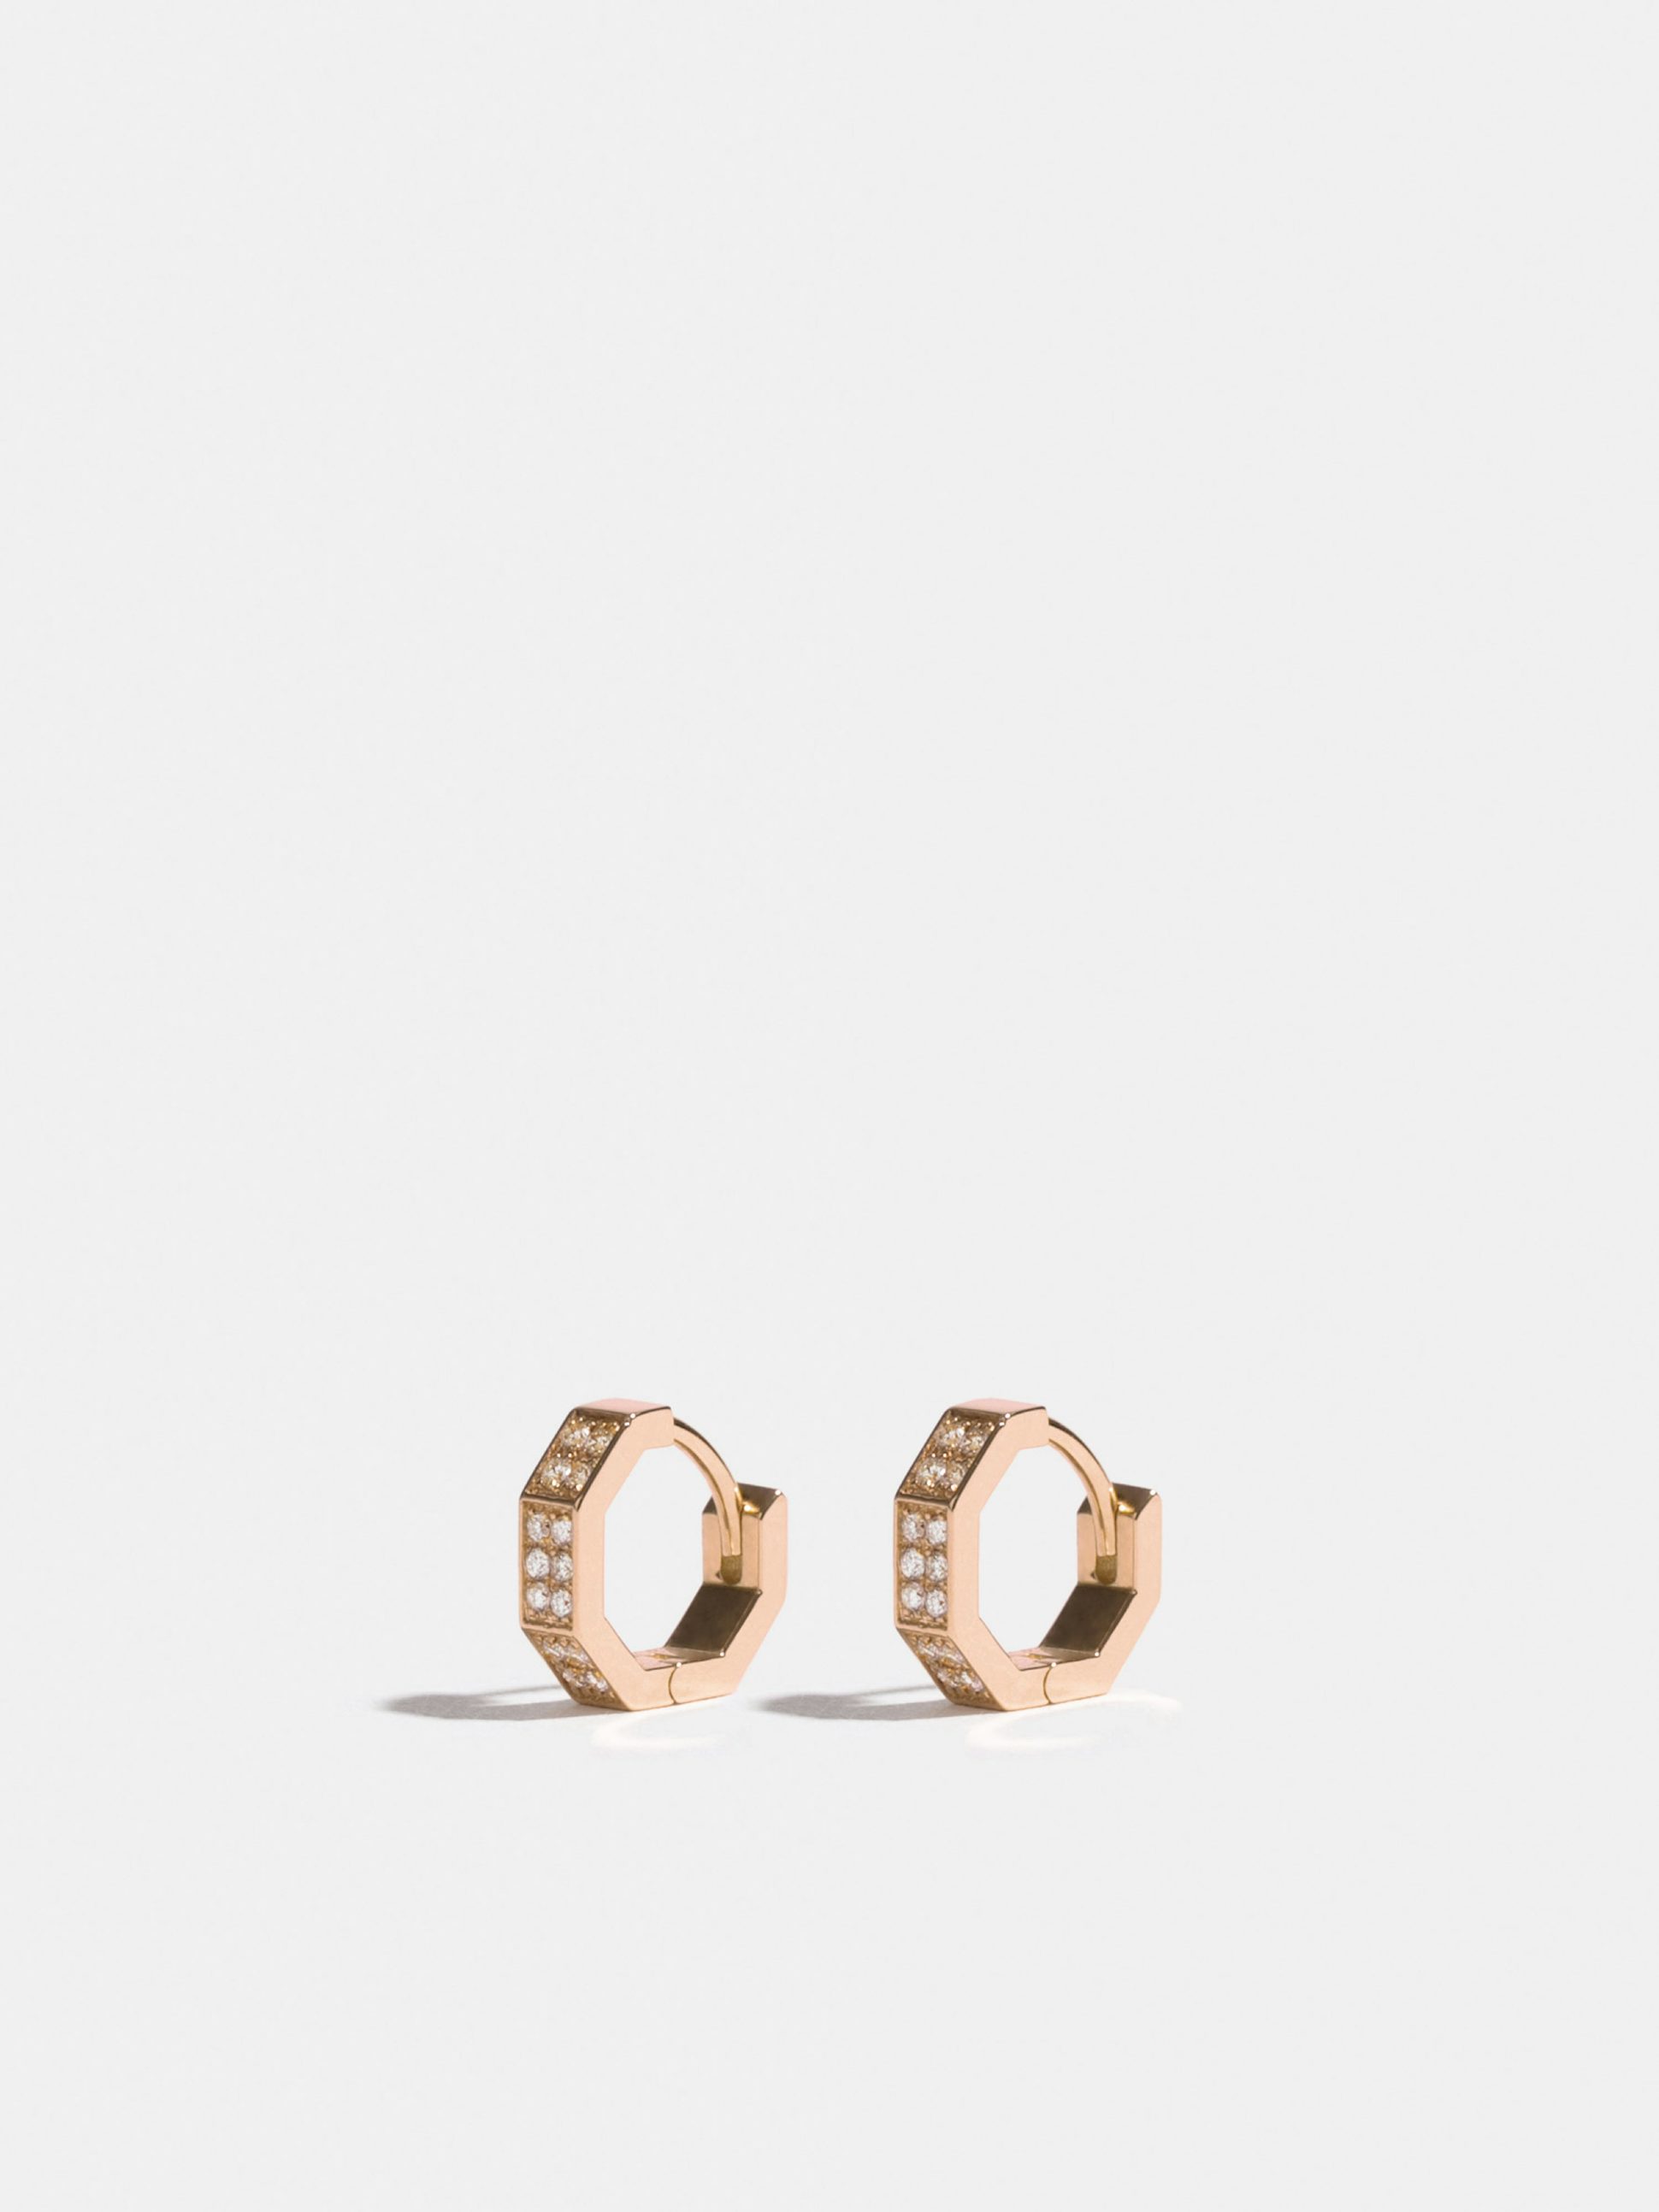 Octogone 10mm earrings in 18k Fairmined ethical rose gold, paved with lab-grown diamonds, the pair.